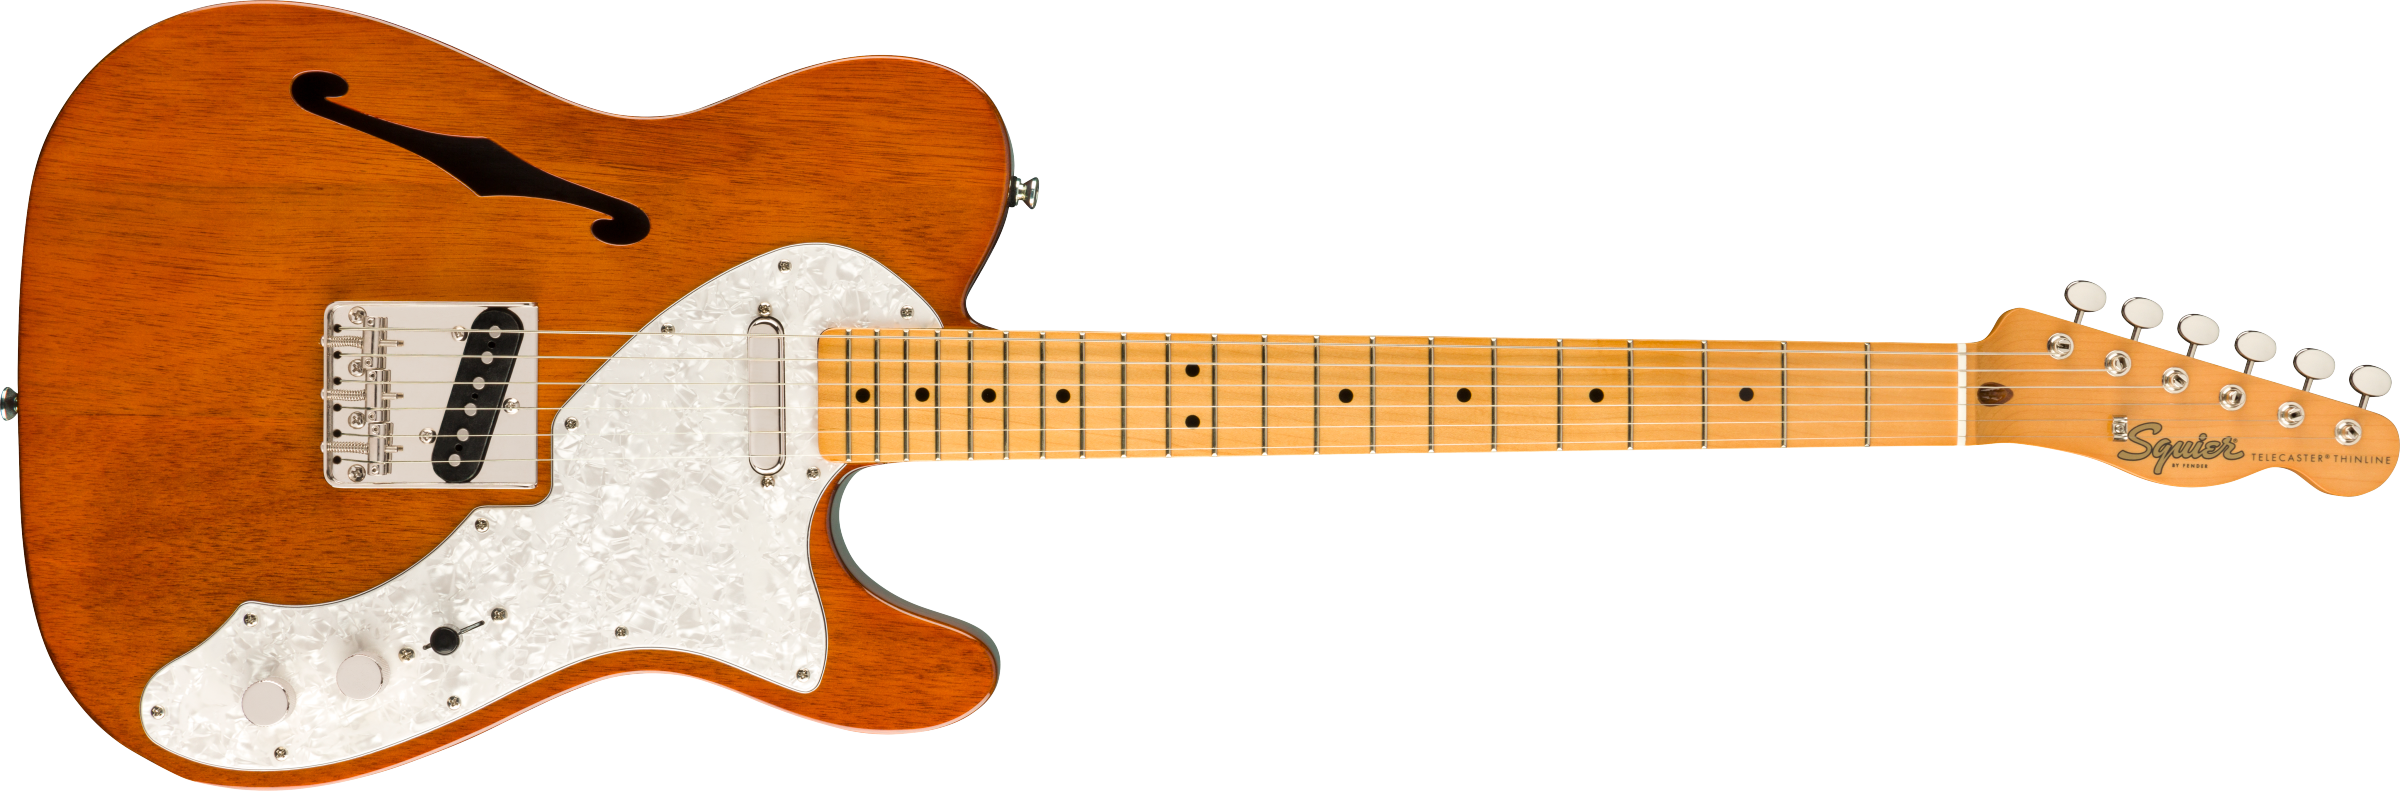 Squier Classic Vibe 60s Telecaster Thinline Maple Fingerboard Natural 0374067521